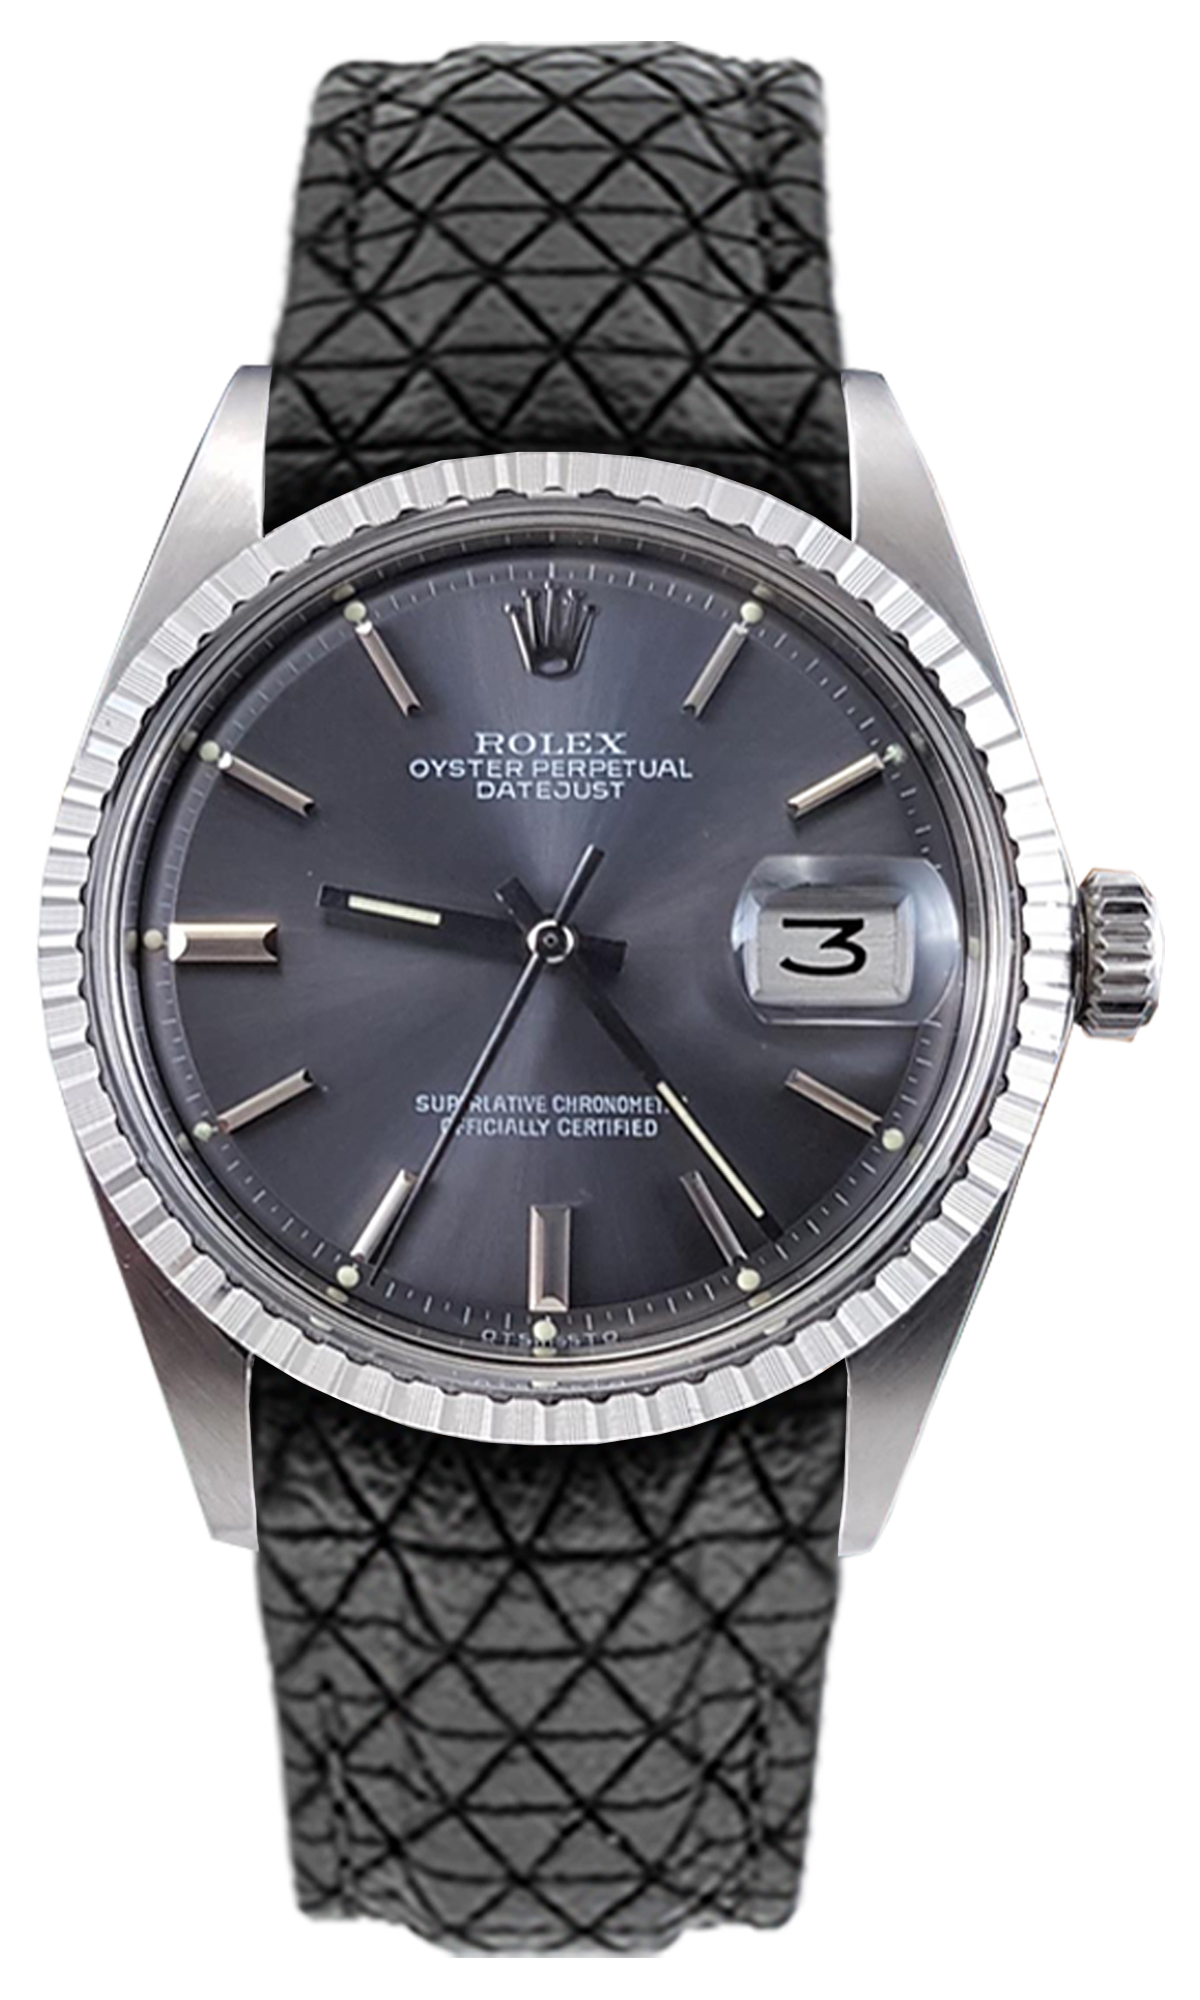 rolex datejust with leather strap